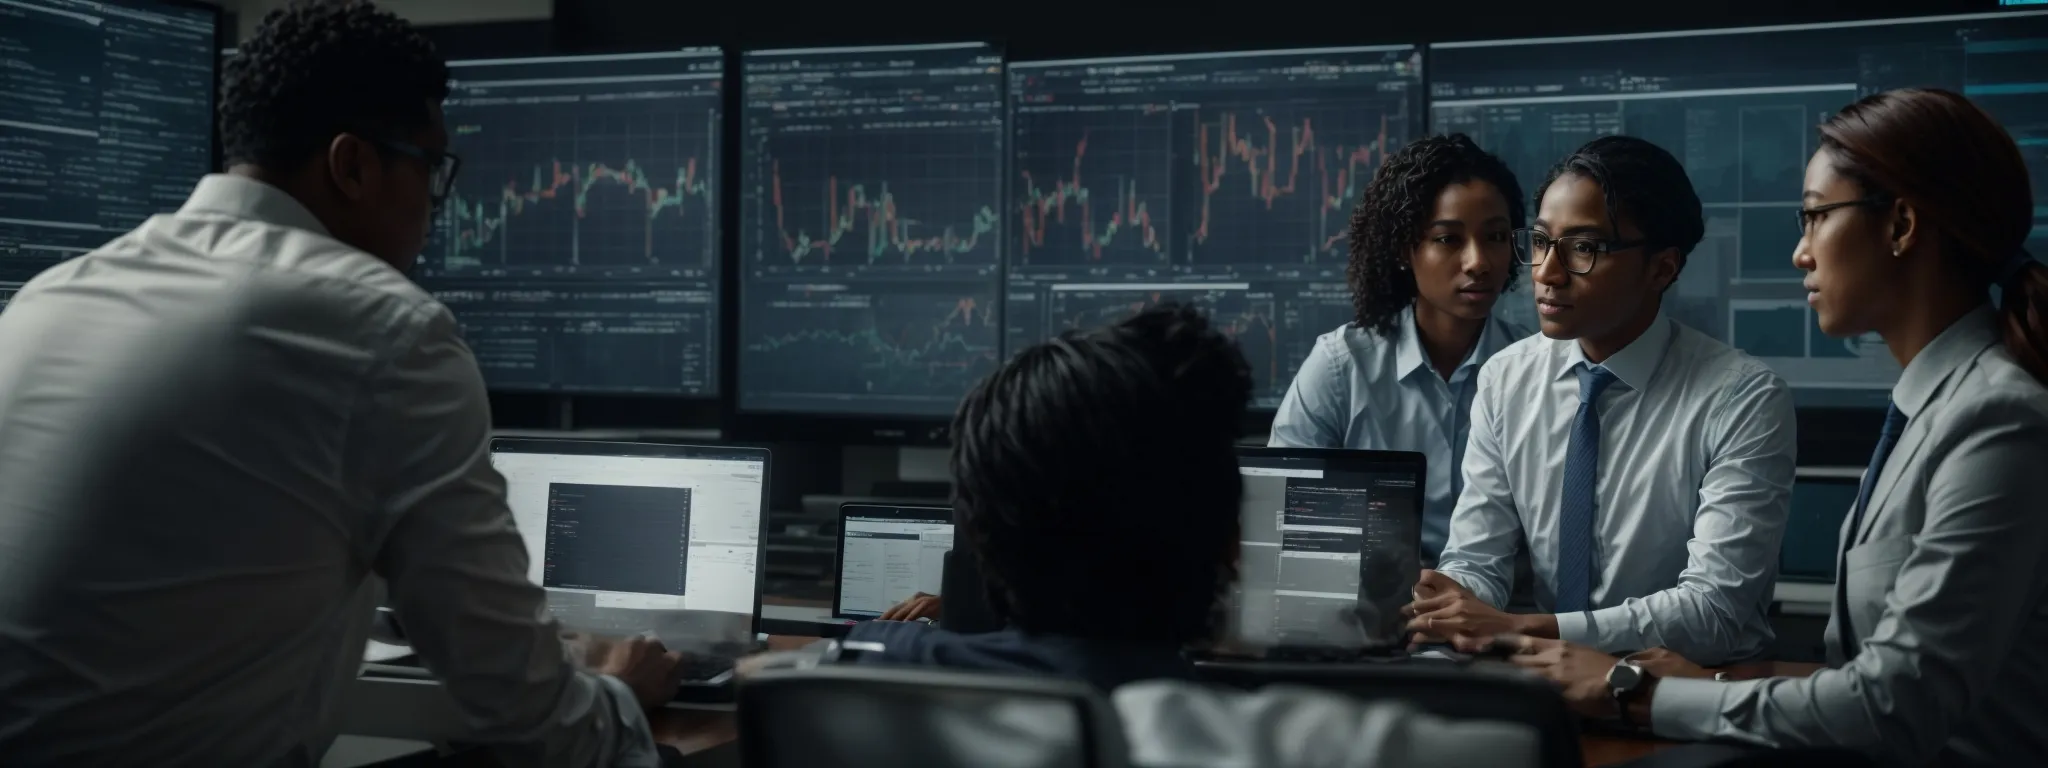 a diverse group of business professionals analyzing data on a large computer screen, showcasing web analytics and seo metrics.